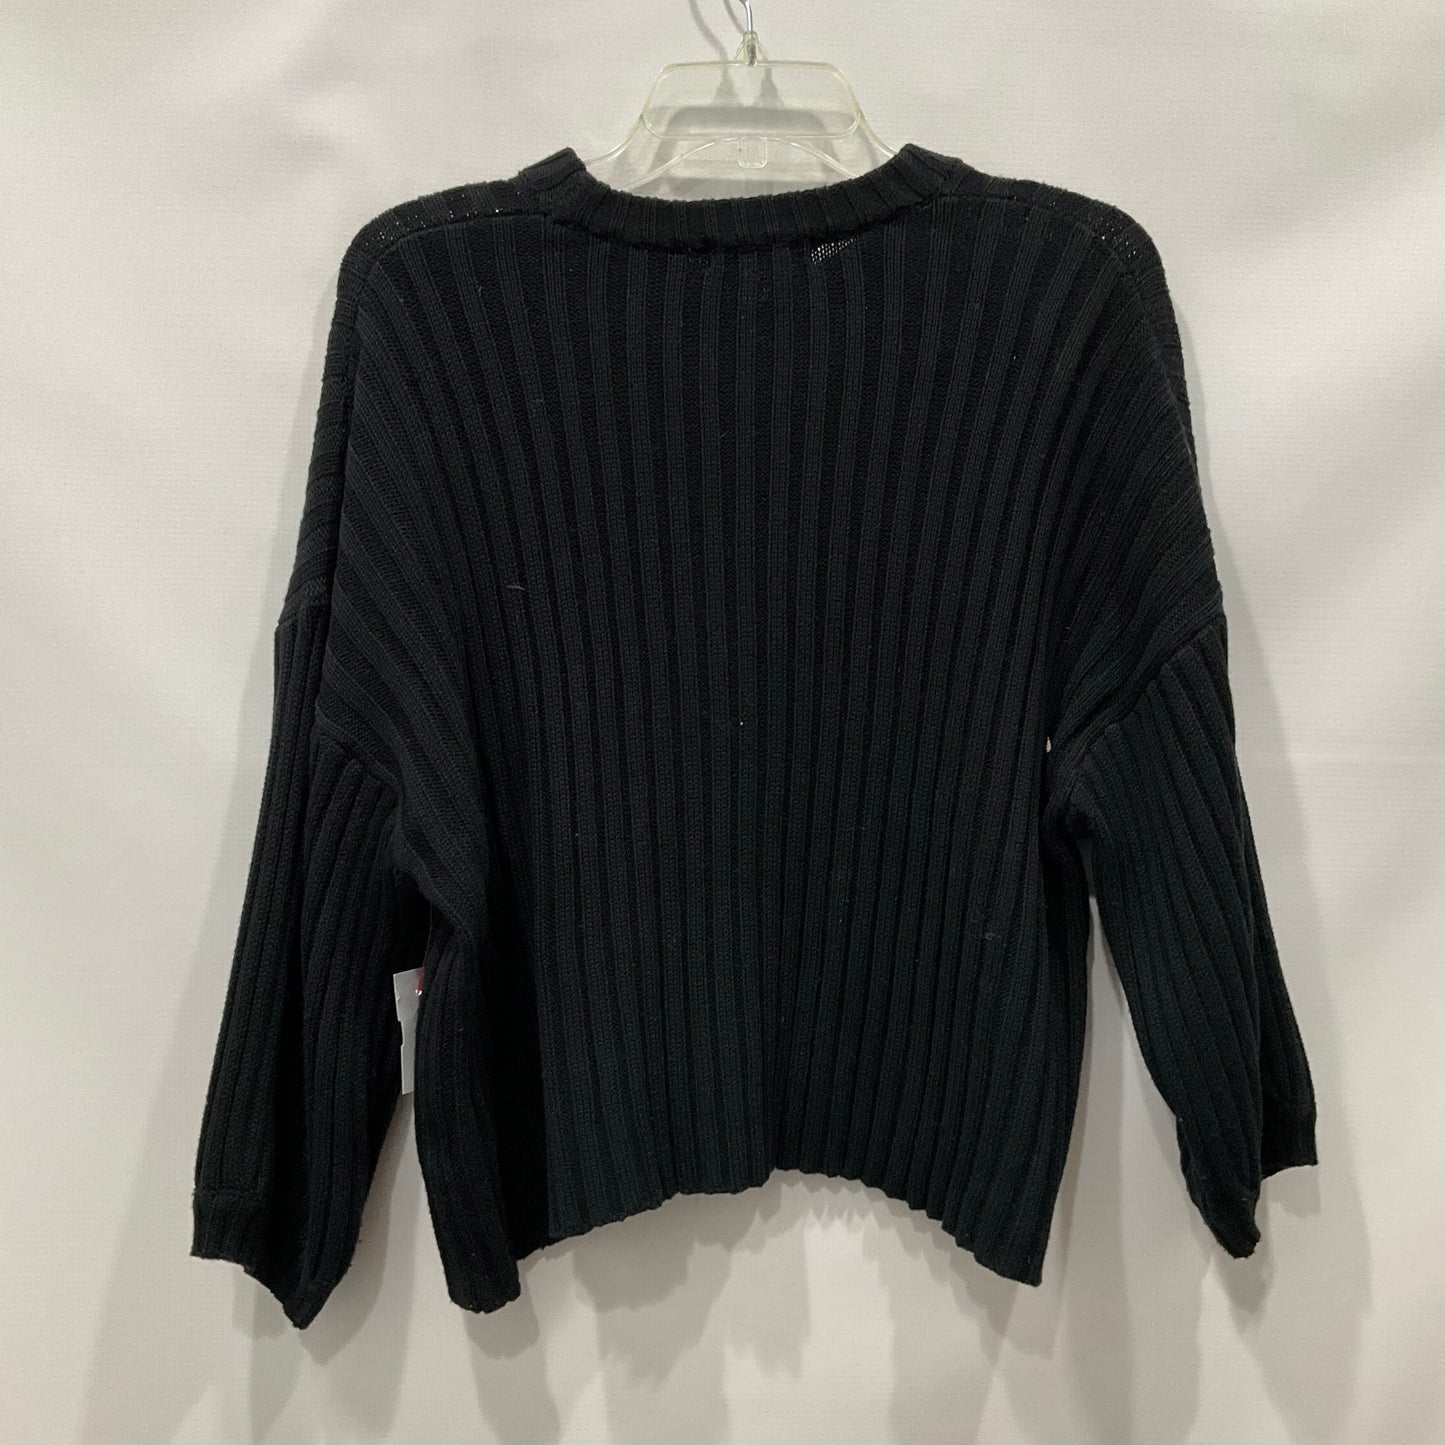 Sweater By The Native One  Size: M